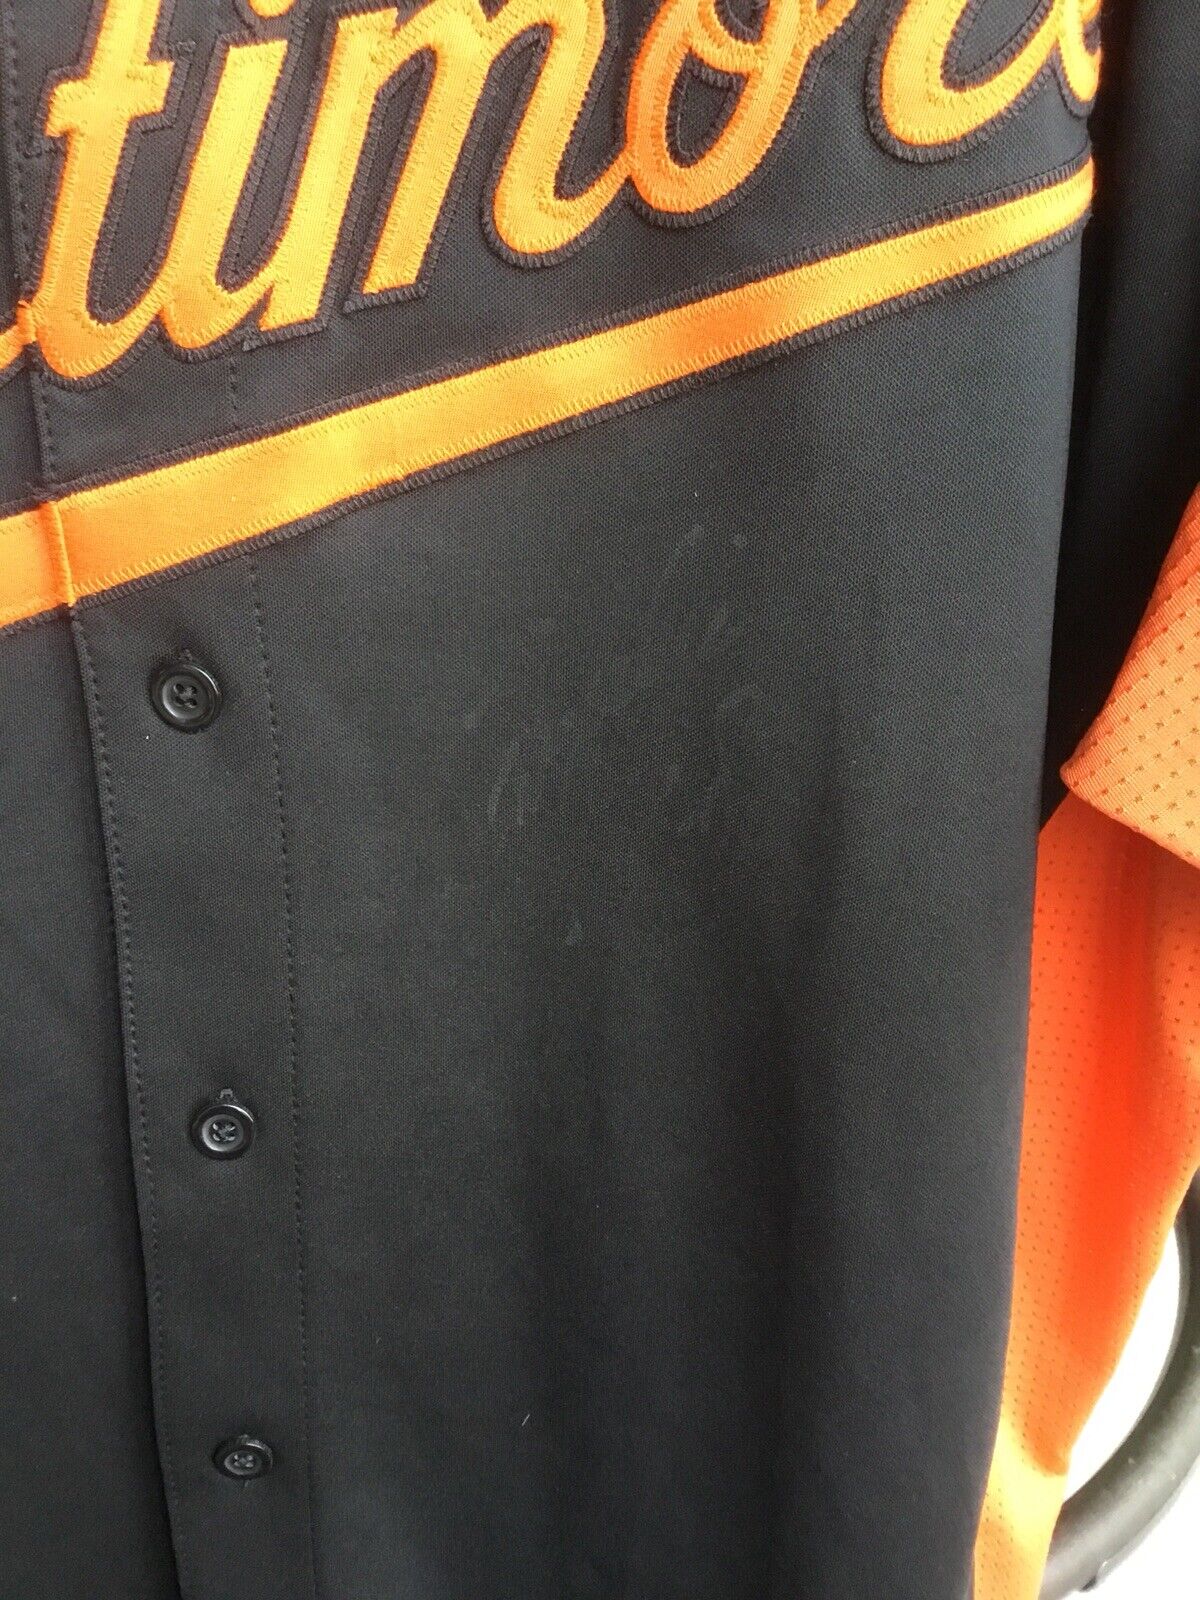 Baltimore Orioles Authentic Black Jersey Majestic New W/O Tags Size 48 -  All Sports Custom Framing